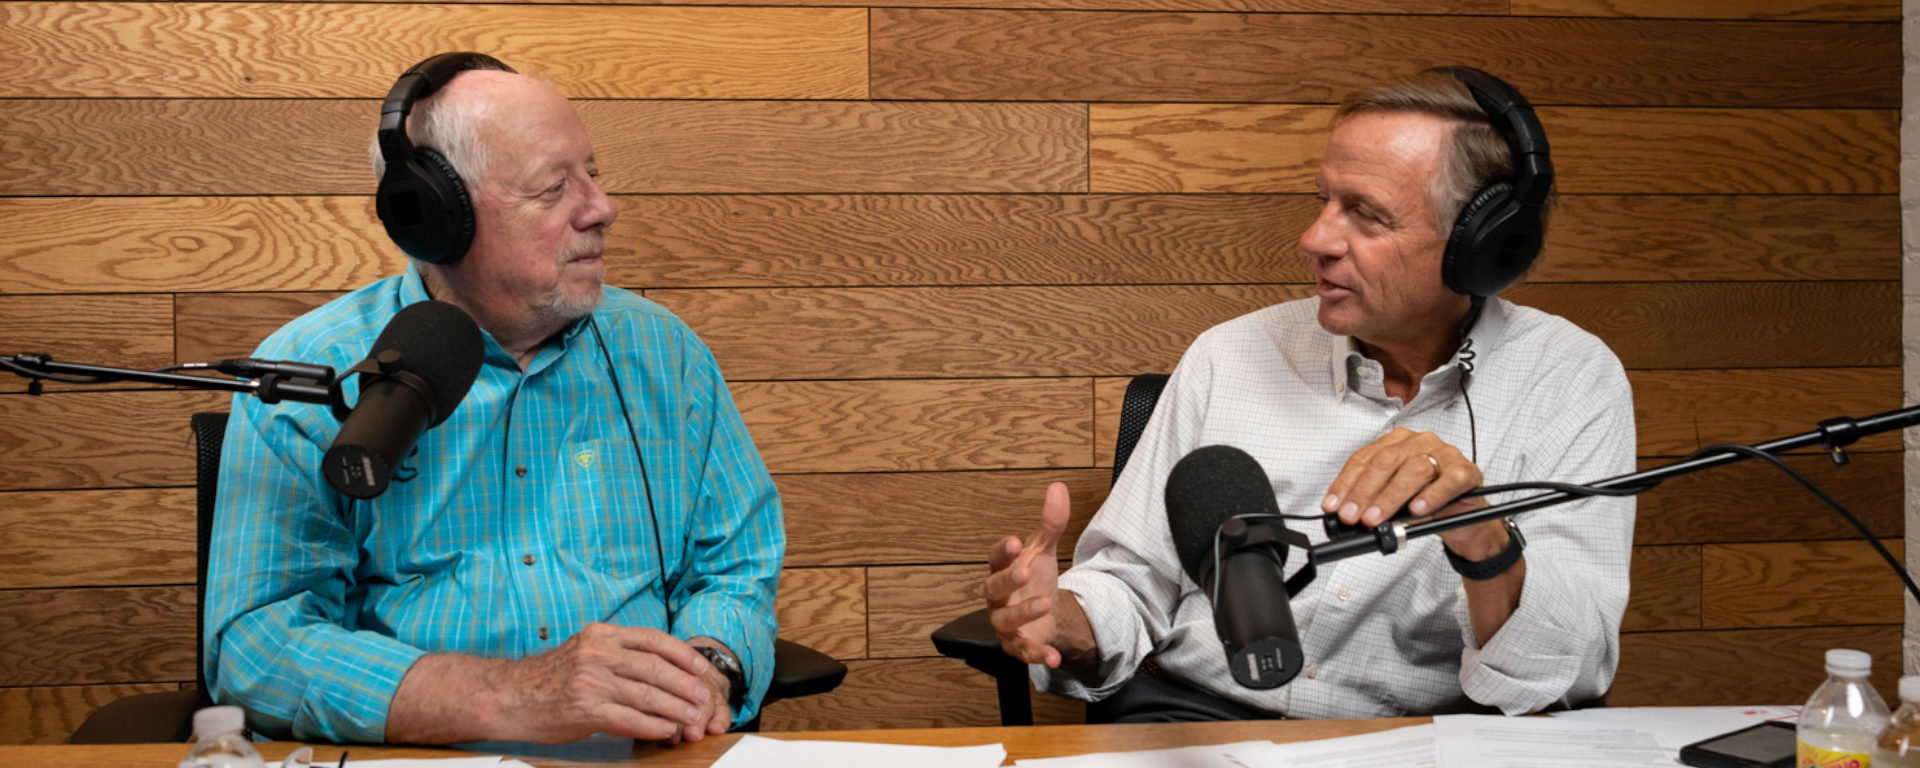 Former Tennessee governors Phil Bredesen, left, and Bill Haslam, right, record an episode of You Might be Right, a new podcast series launched by the Howard H. Baker Jr. Center for Public Policy.